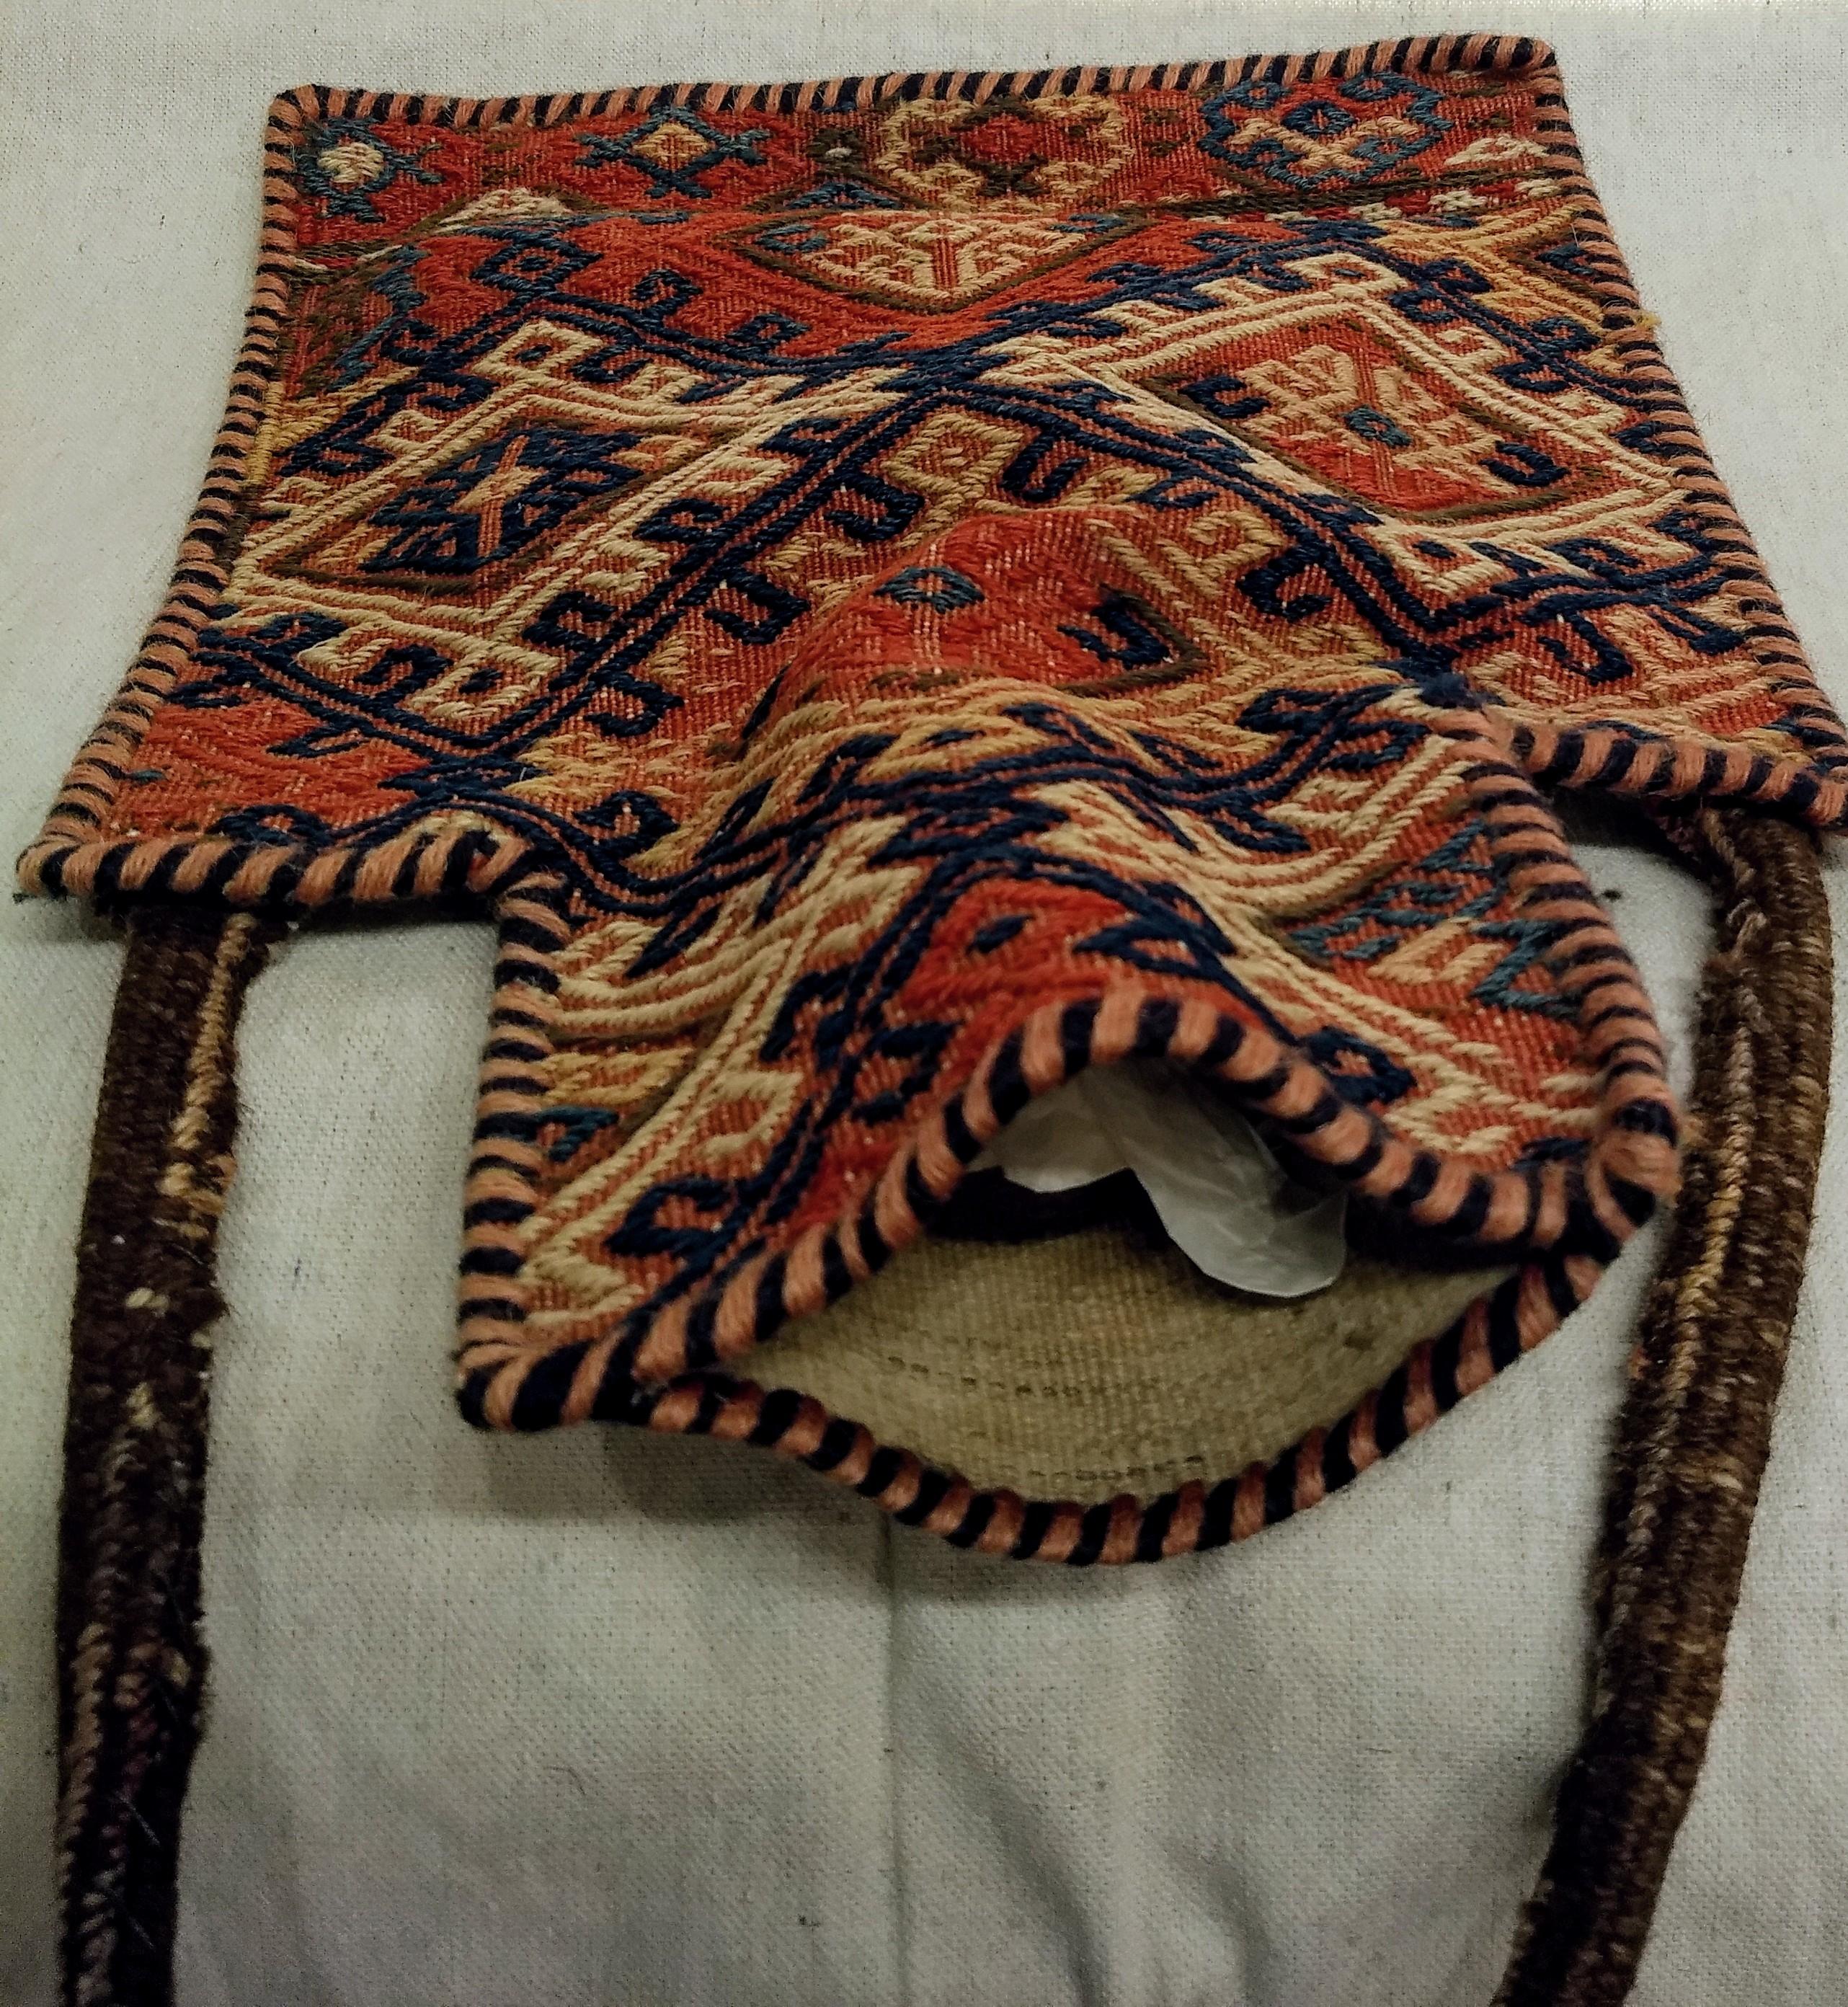 20th Century Vintage Persian Baluch Soumak Salt Bag in Red, Blue, Brown as Tribal Wall Art For Sale